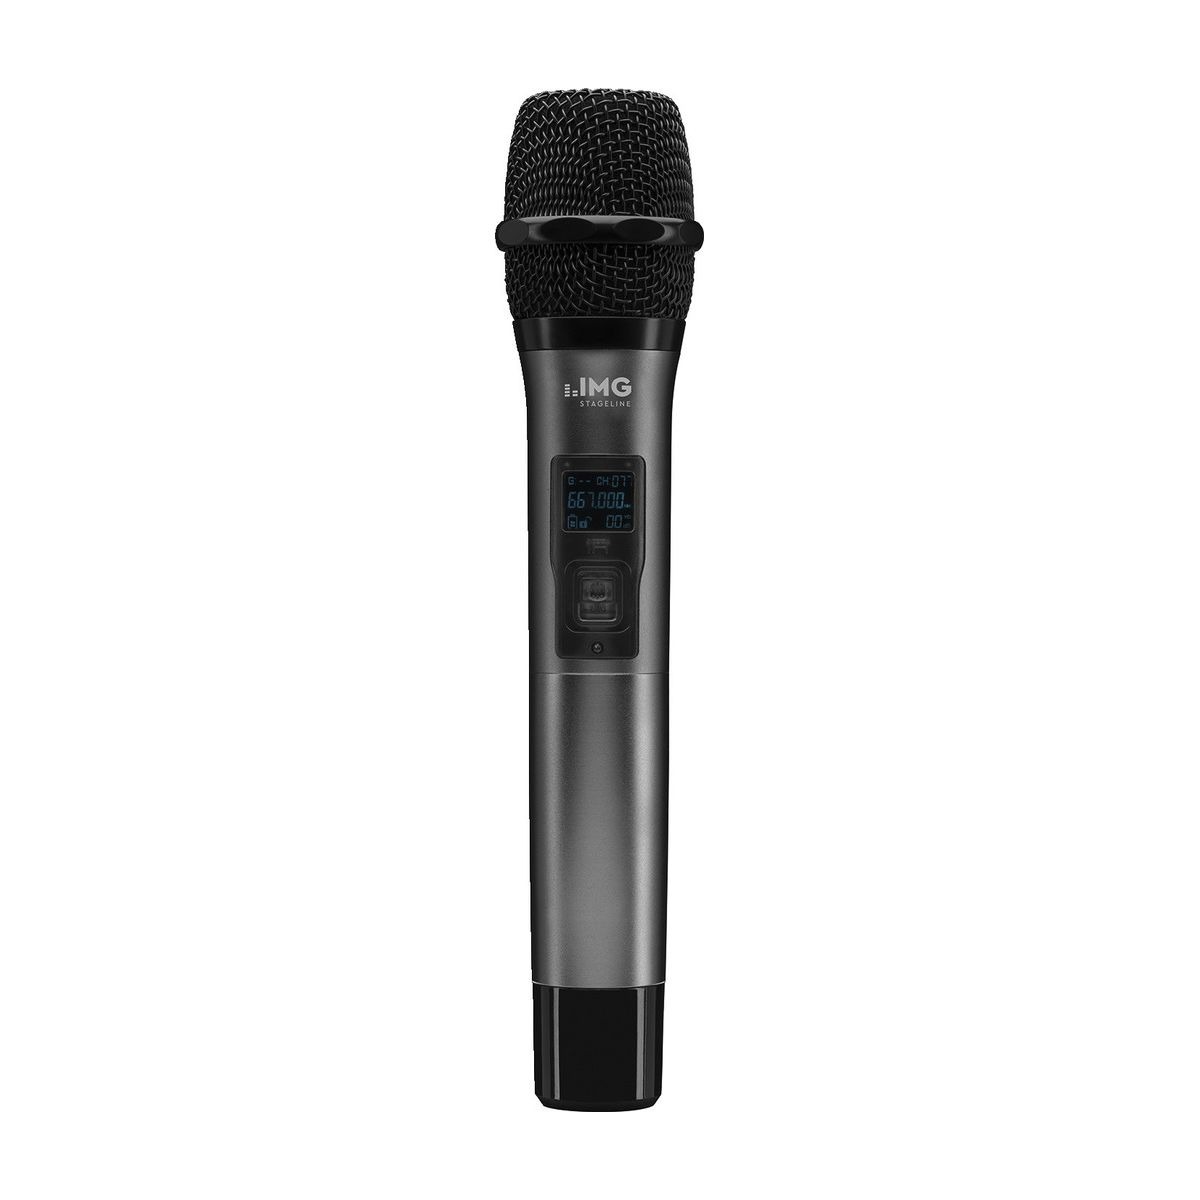 Hand-held microphone with integrated multifrequency transmitter, 667.000-691.750 MHz | TXS-707HT-0